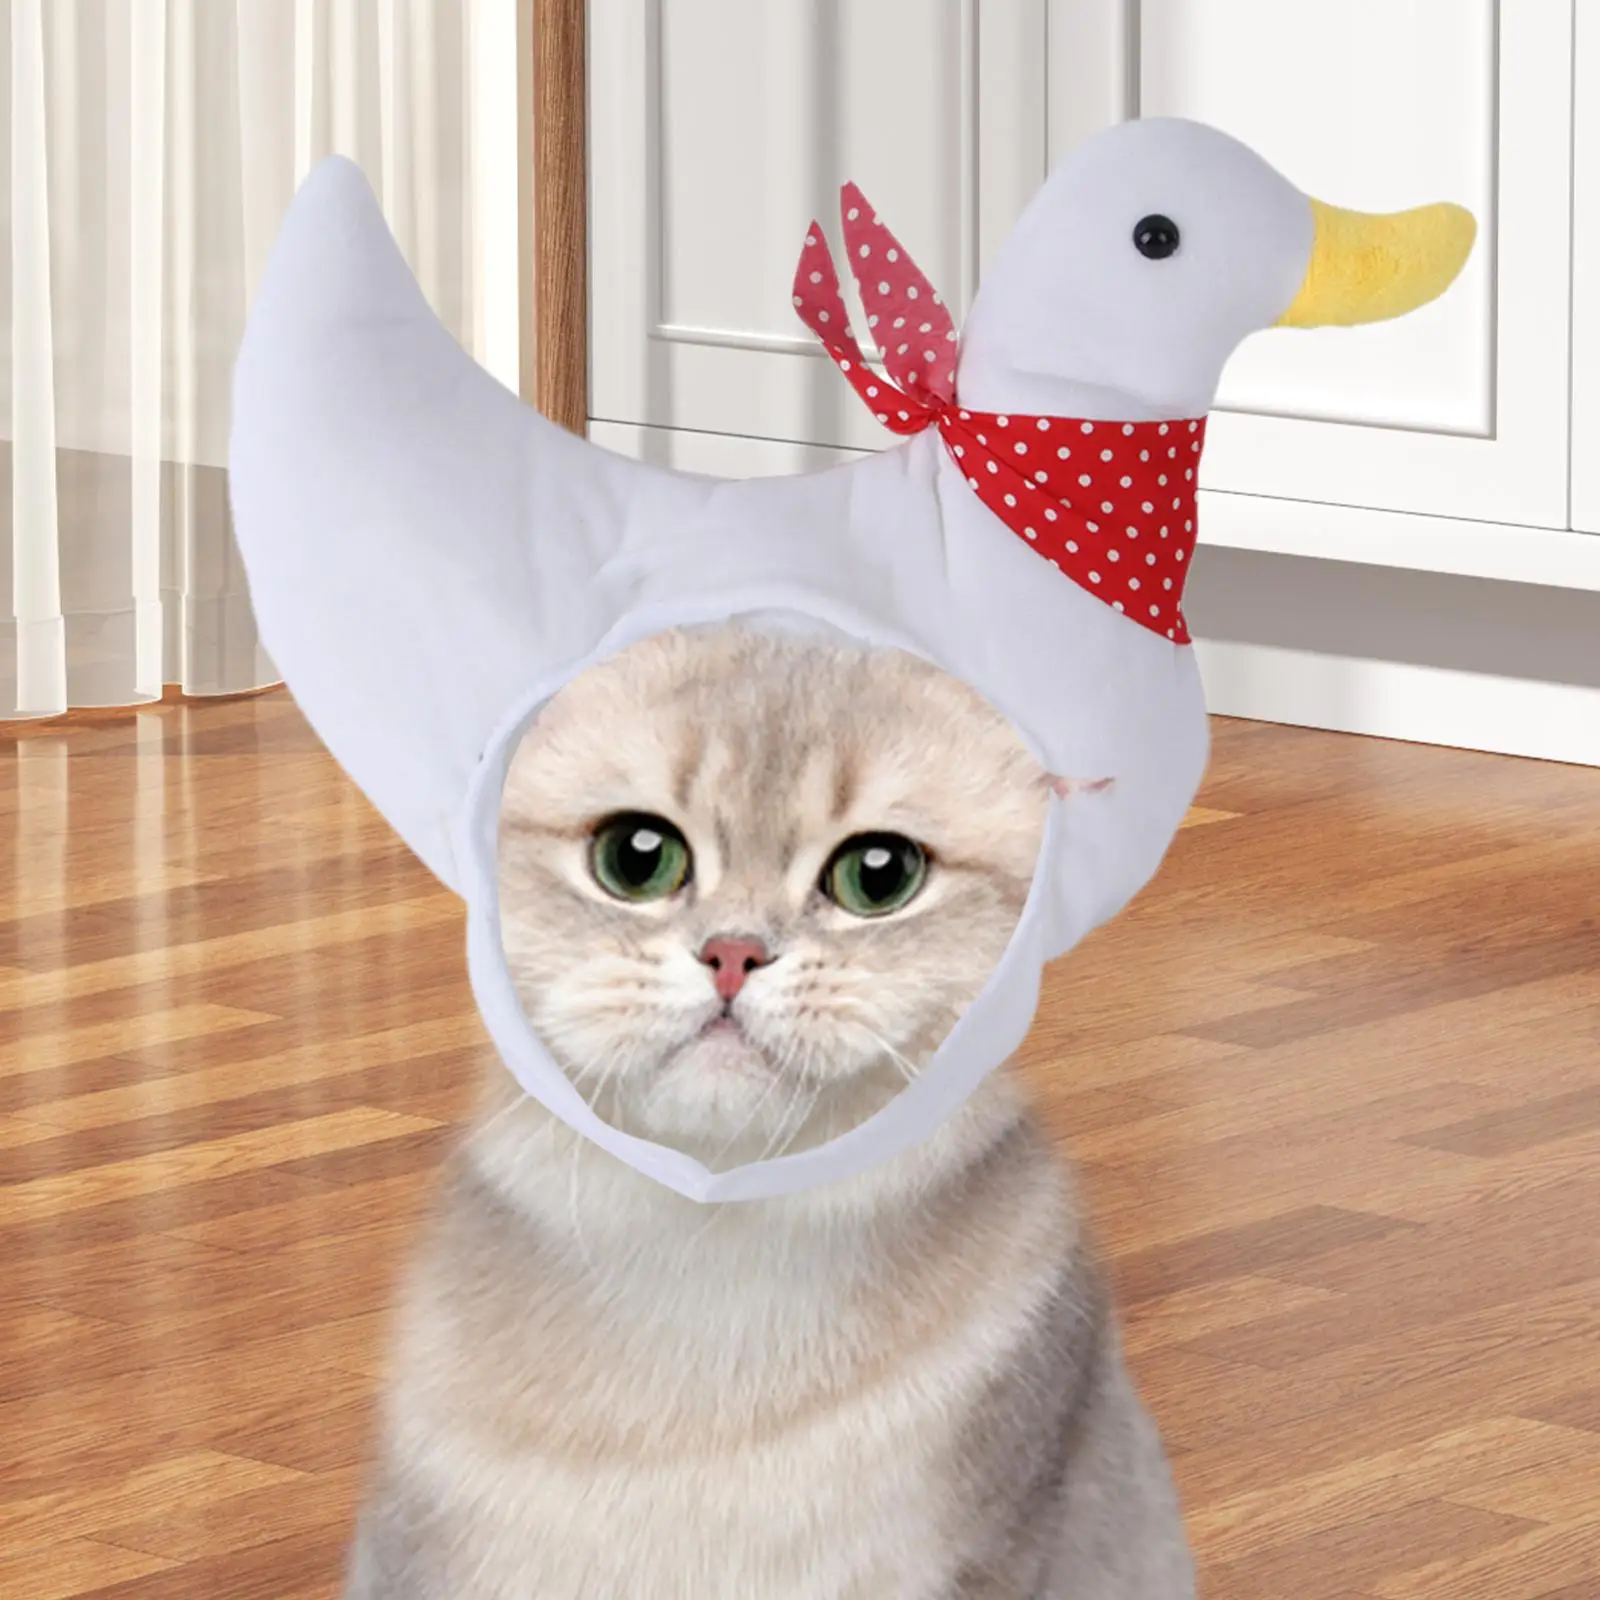 Duck Shape Pet Hat Decoration Photo Props Funny Cosplay Outfit Funny Caps for Puppy Cat Small Puppy Dogs Holiday Party Easter